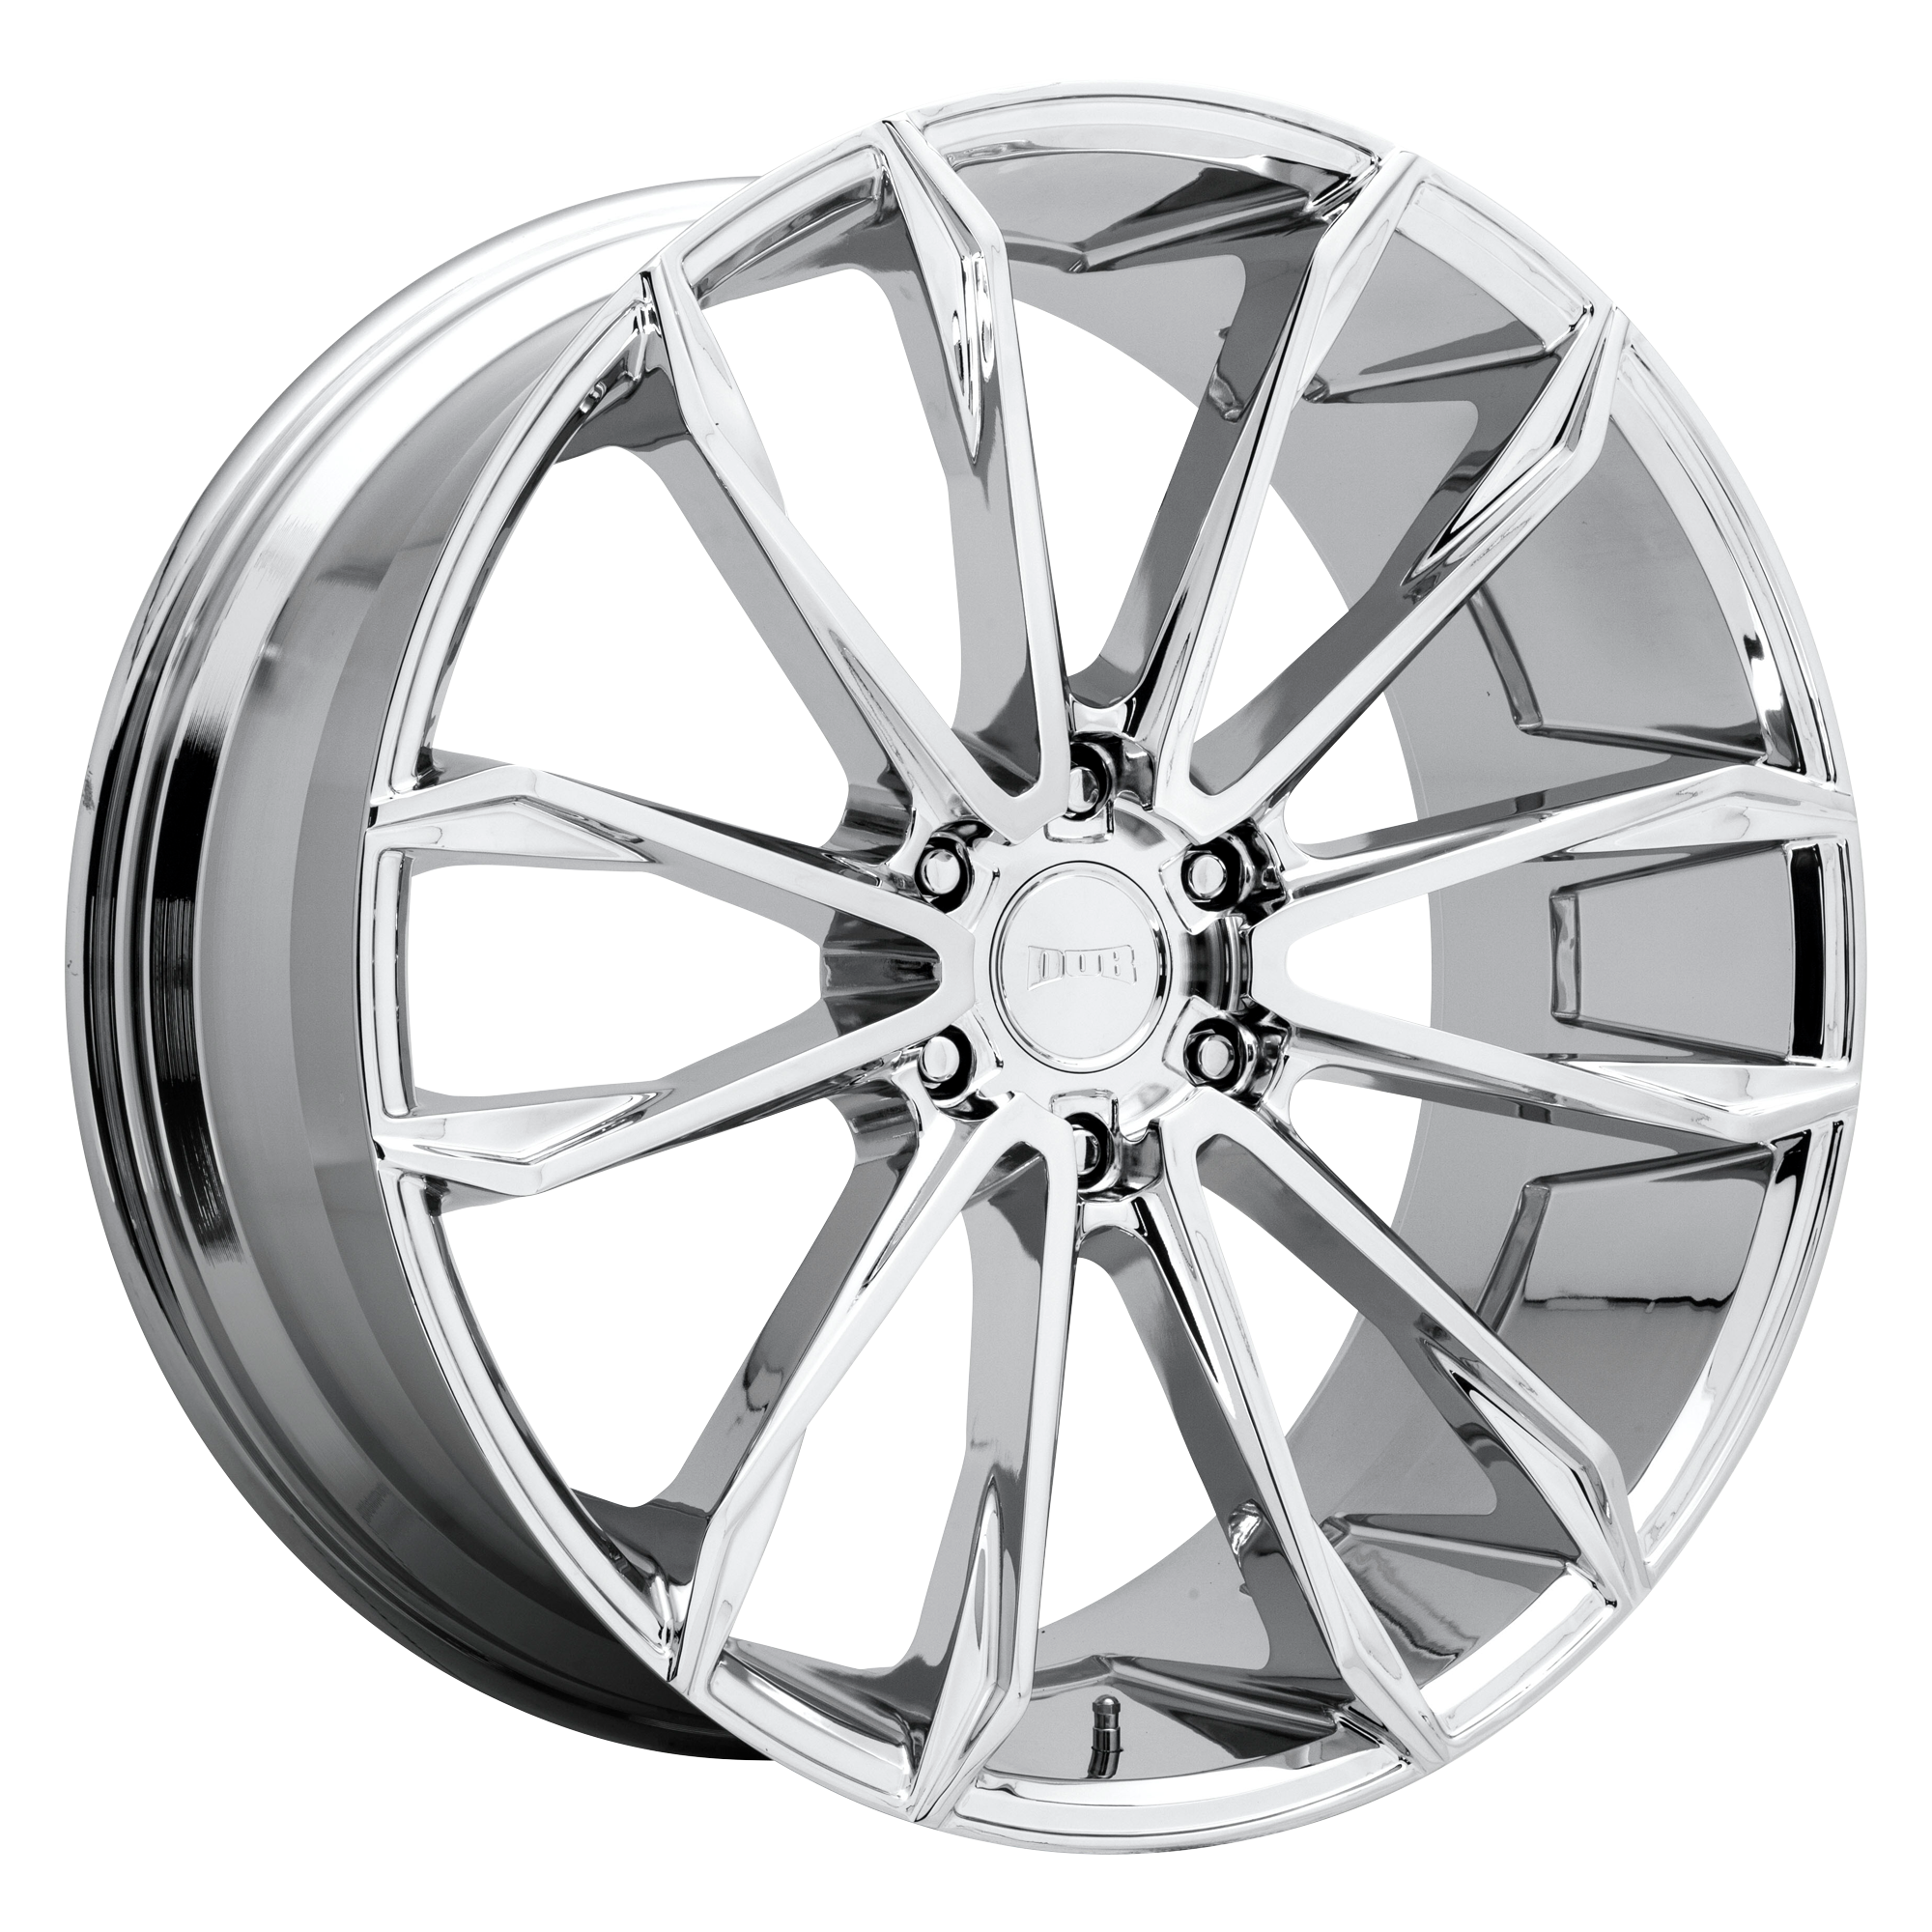 CLOUT 24x10 6x135.00 CHROME PLATED (30 mm) - Tires and Engine Performance